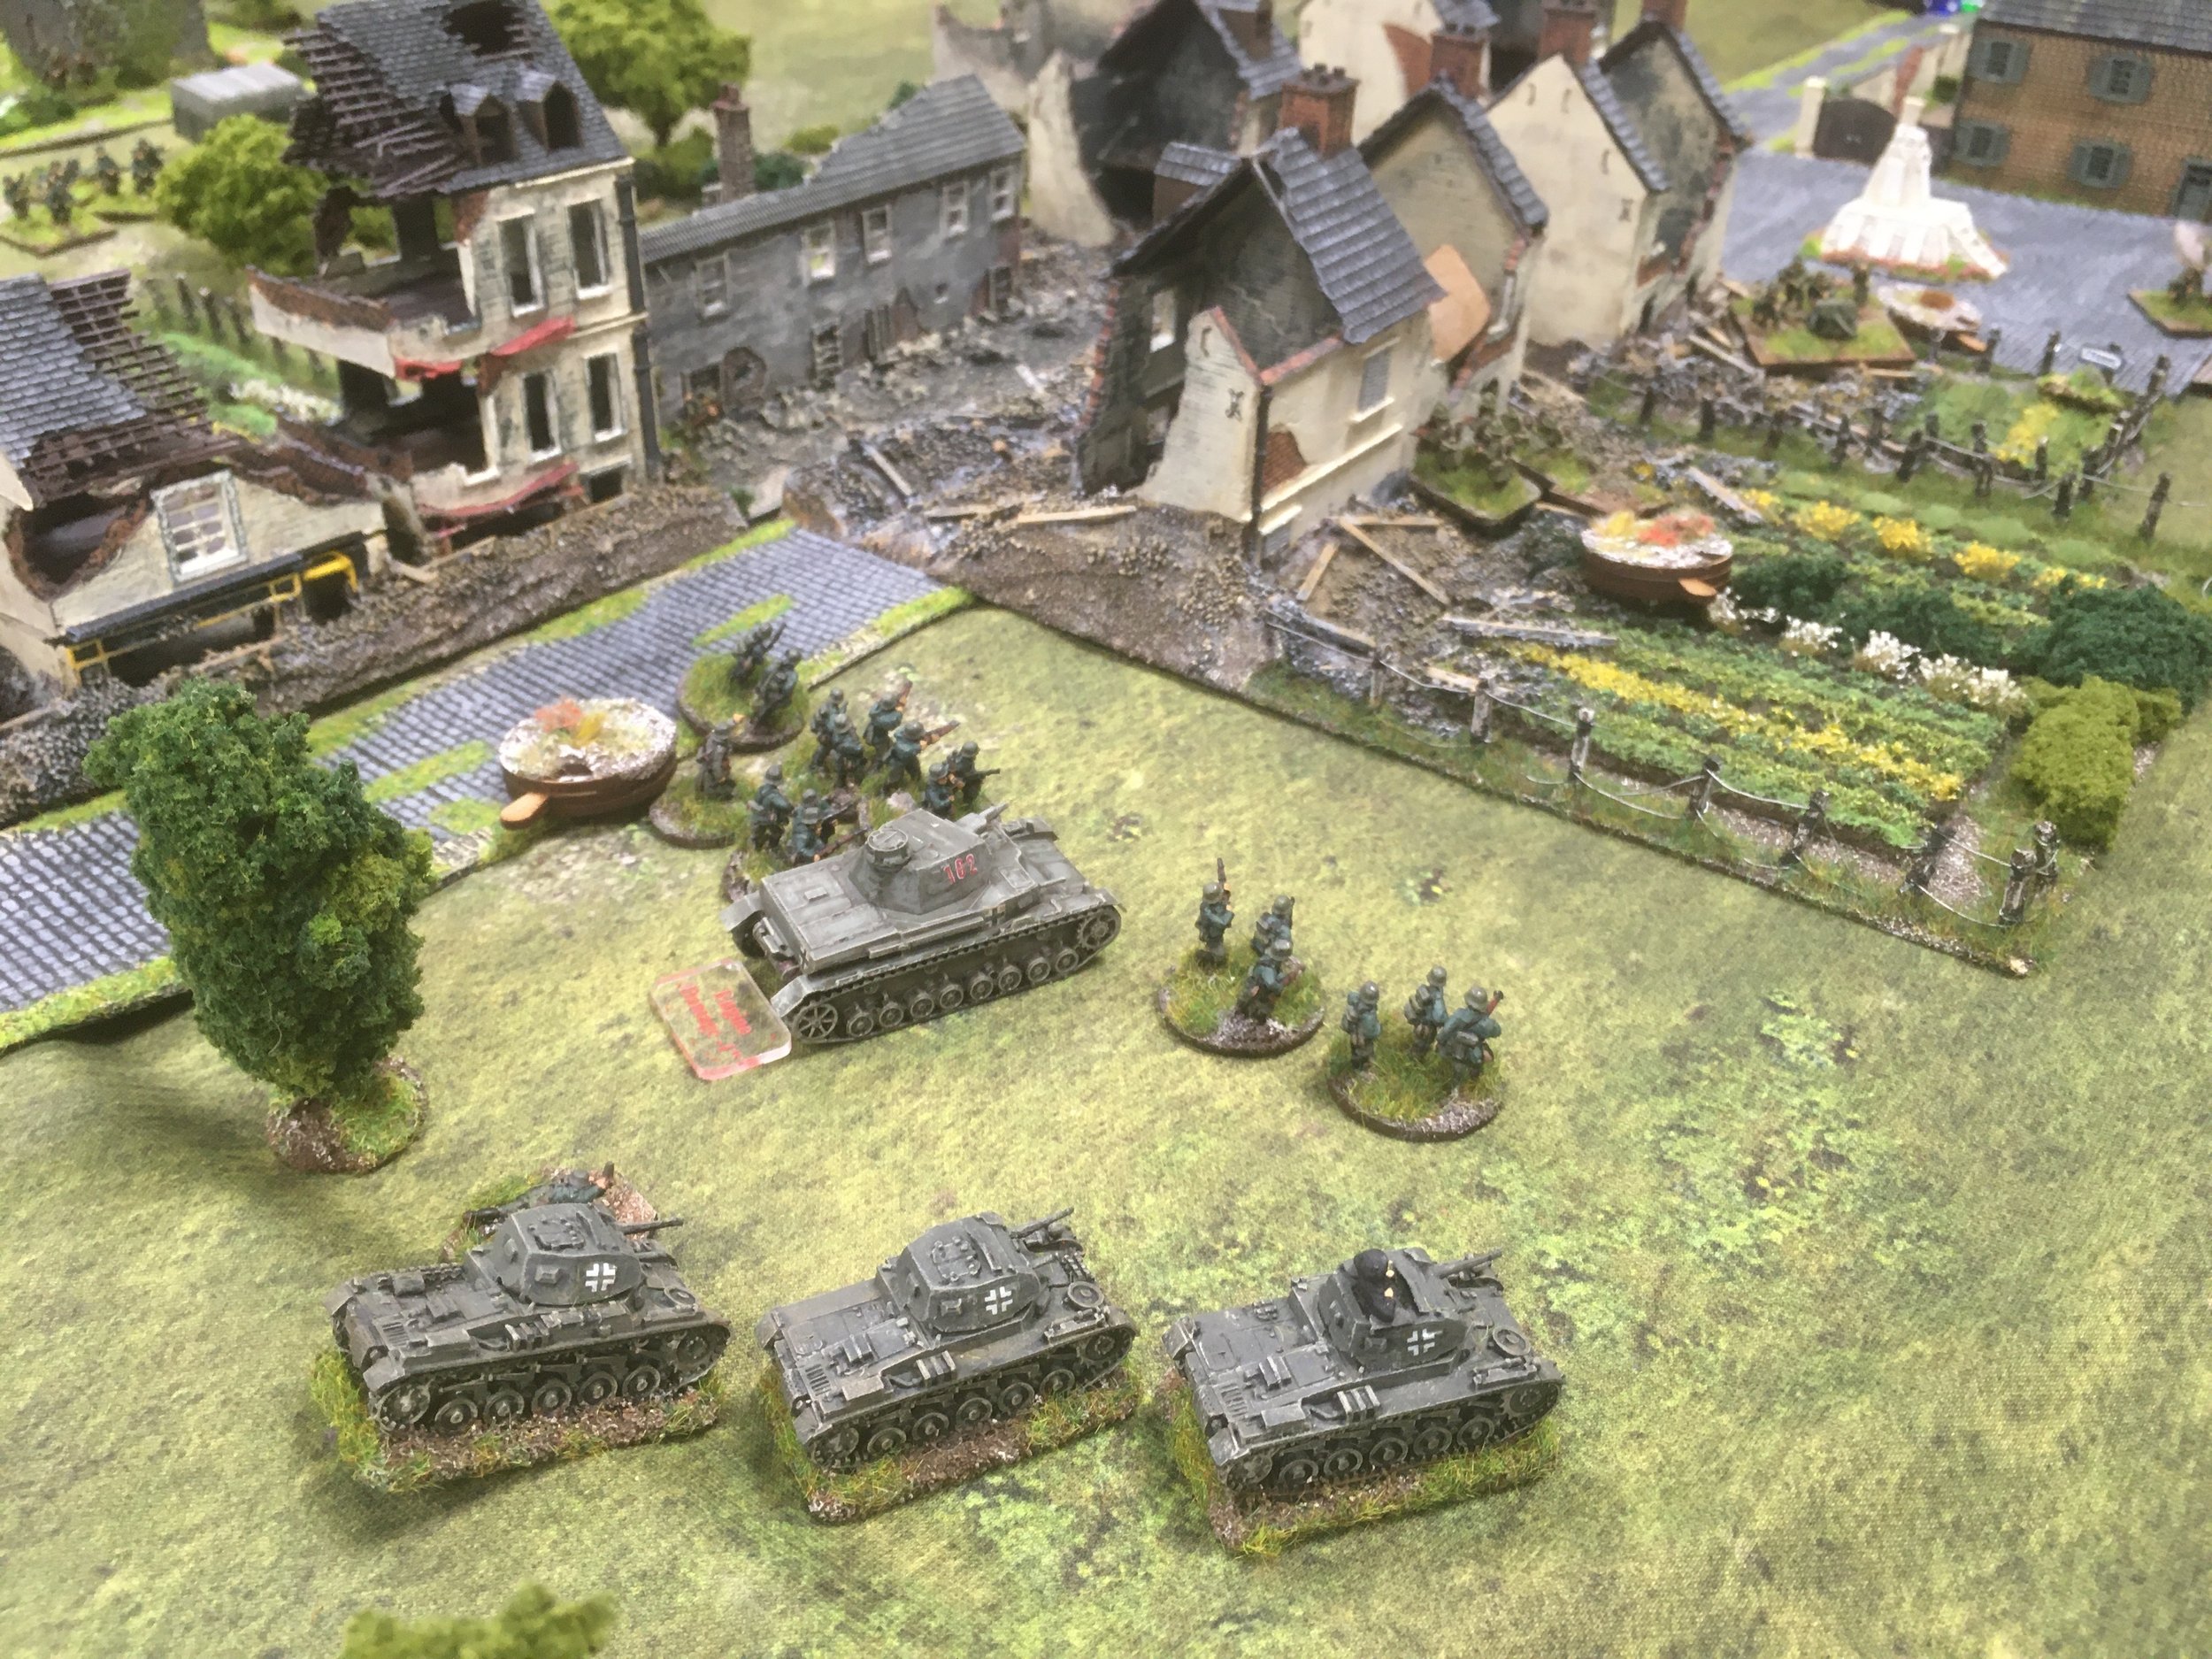 In the centre the slowly moving Panzer IV, now supported by the dismounted motorcycle platoon and Panzer II platoon engage the French infantry and surviving Hotchkiss anti-tank gun.